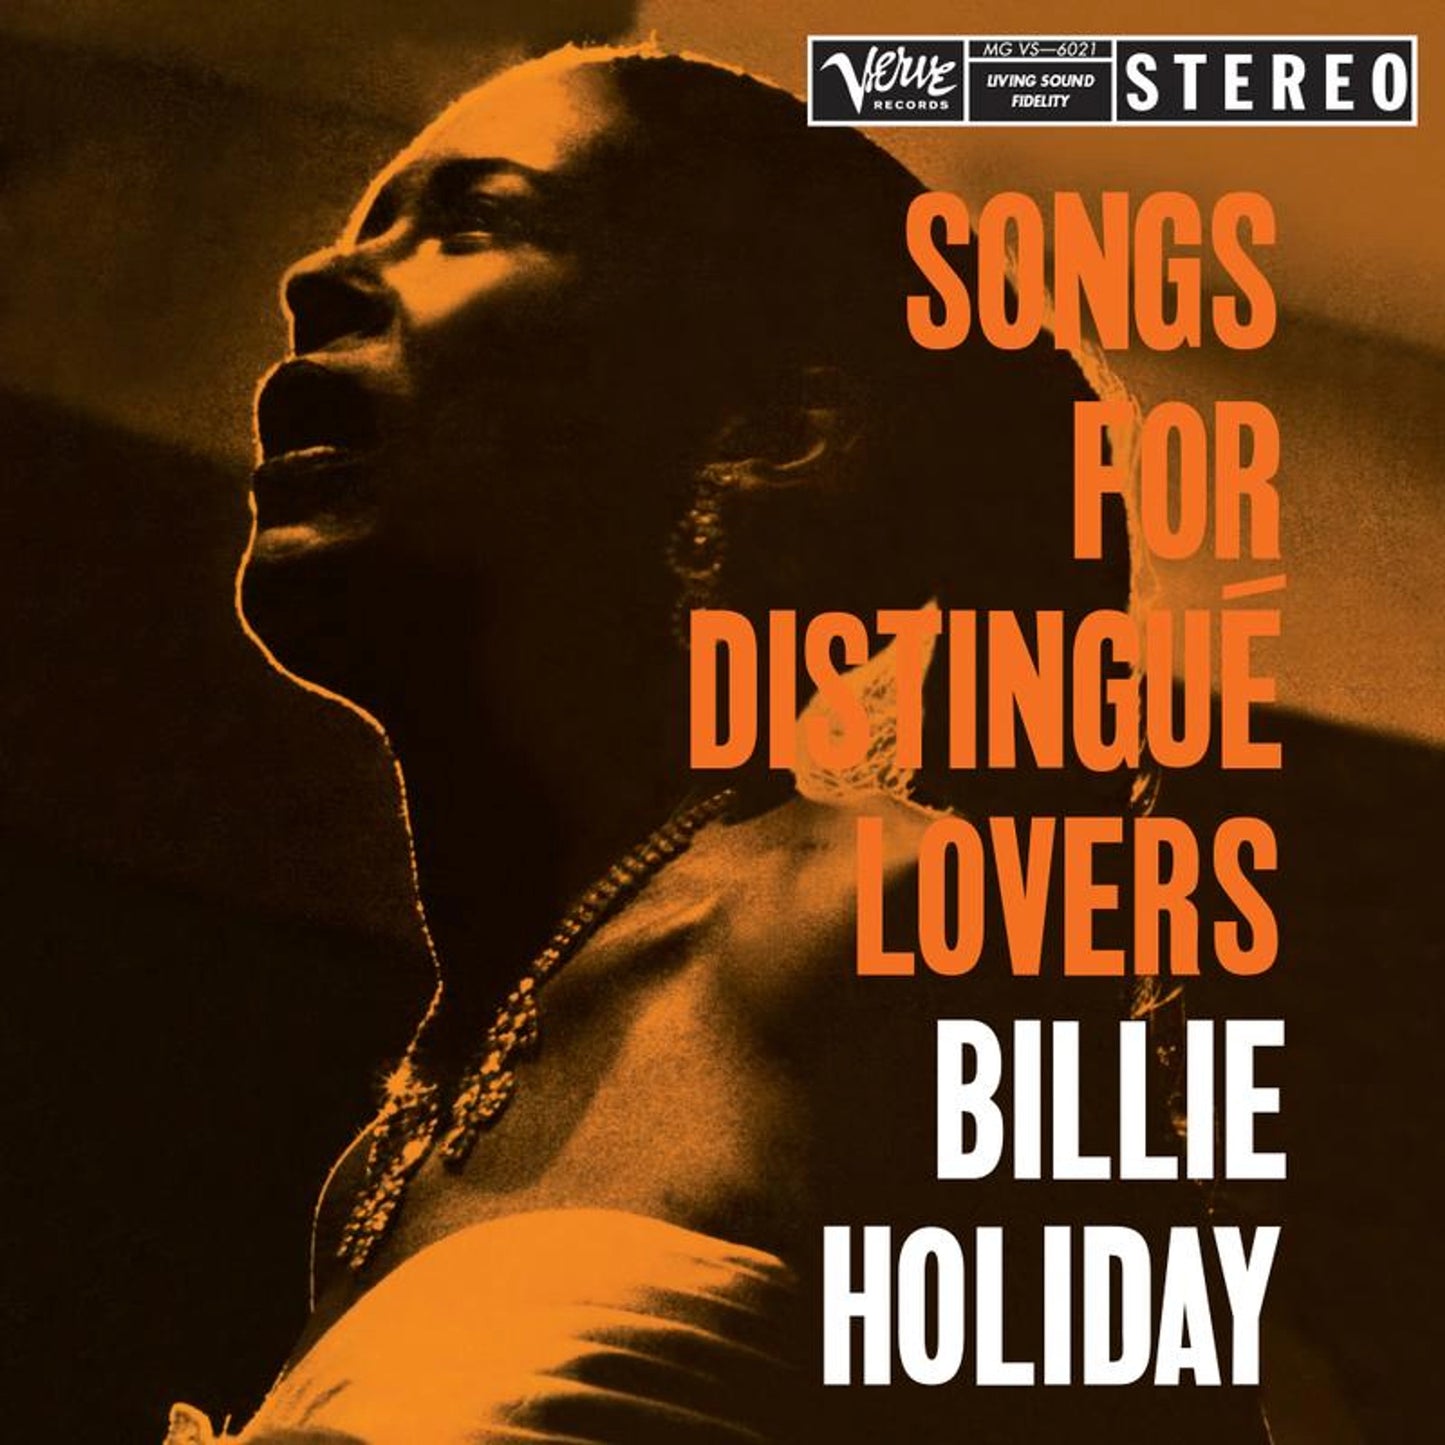 Billie Holiday - Songs For Distingue Lovers - Verve Series LP